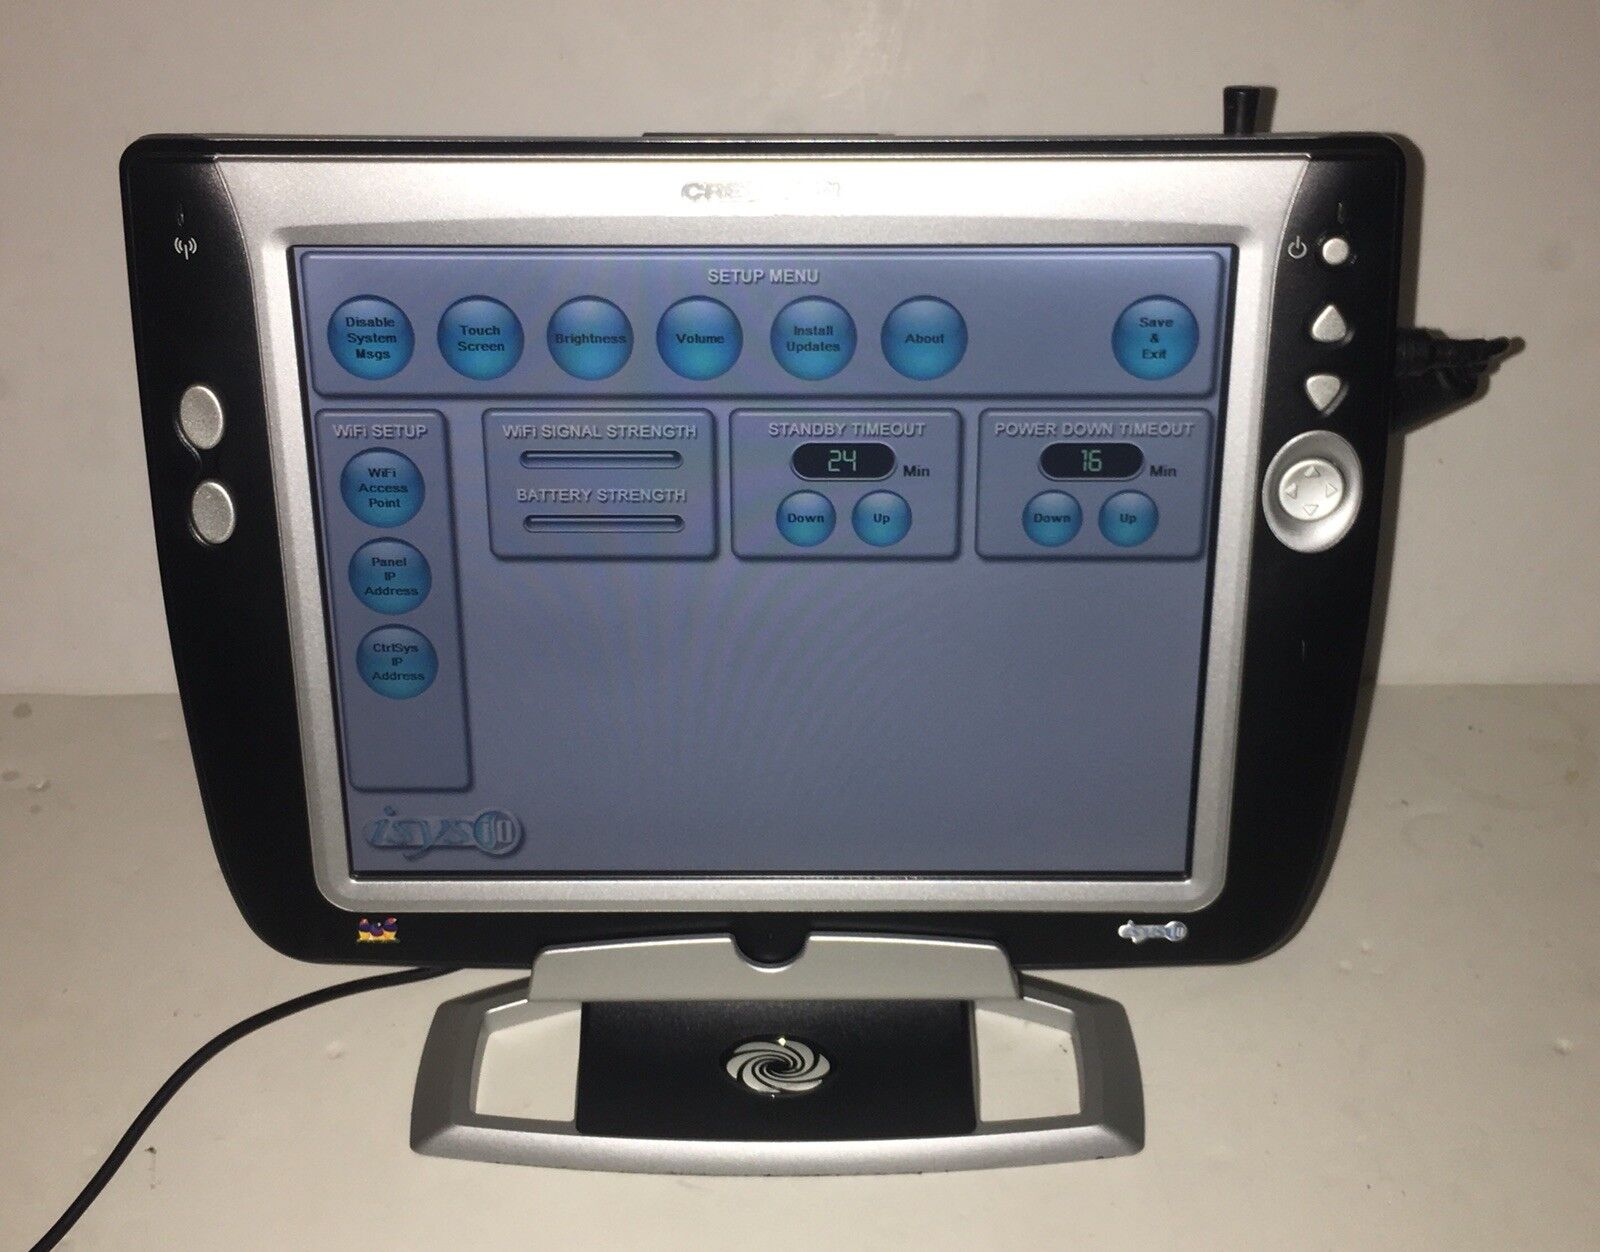 Crestron TPMC-10 ViewSonic Tablet TouchScreen w/Dock & Adapter - Needs Battery